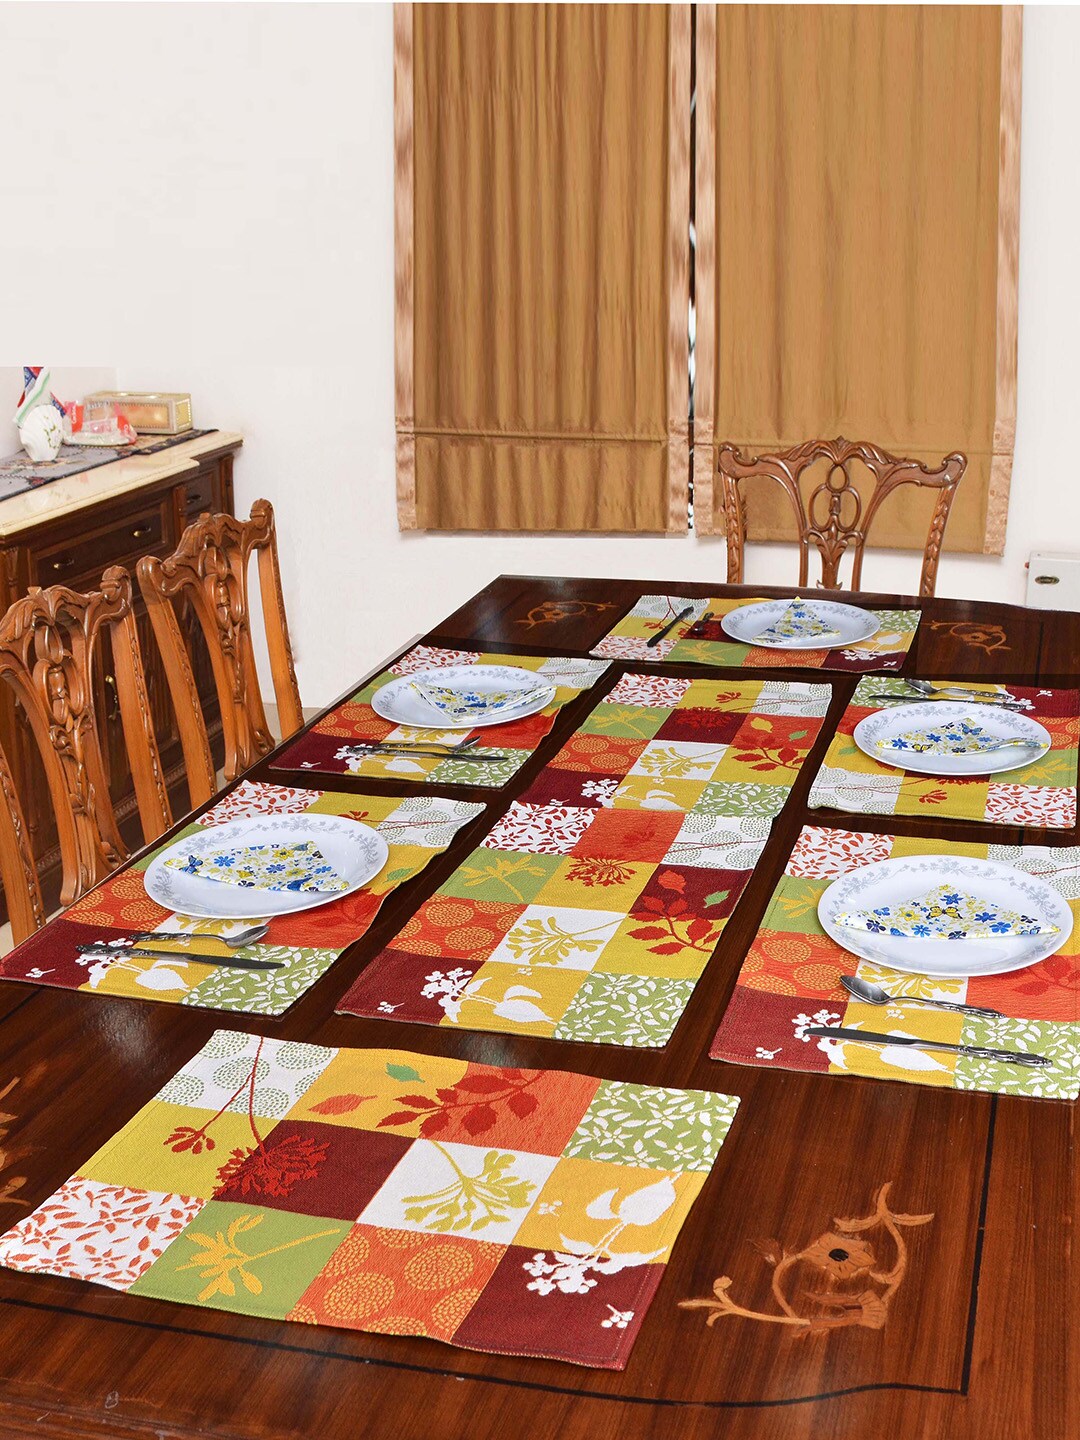 Avira Home Set of 7 Multicoloured Jaquard Woven Table Placemats With Runner Price in India